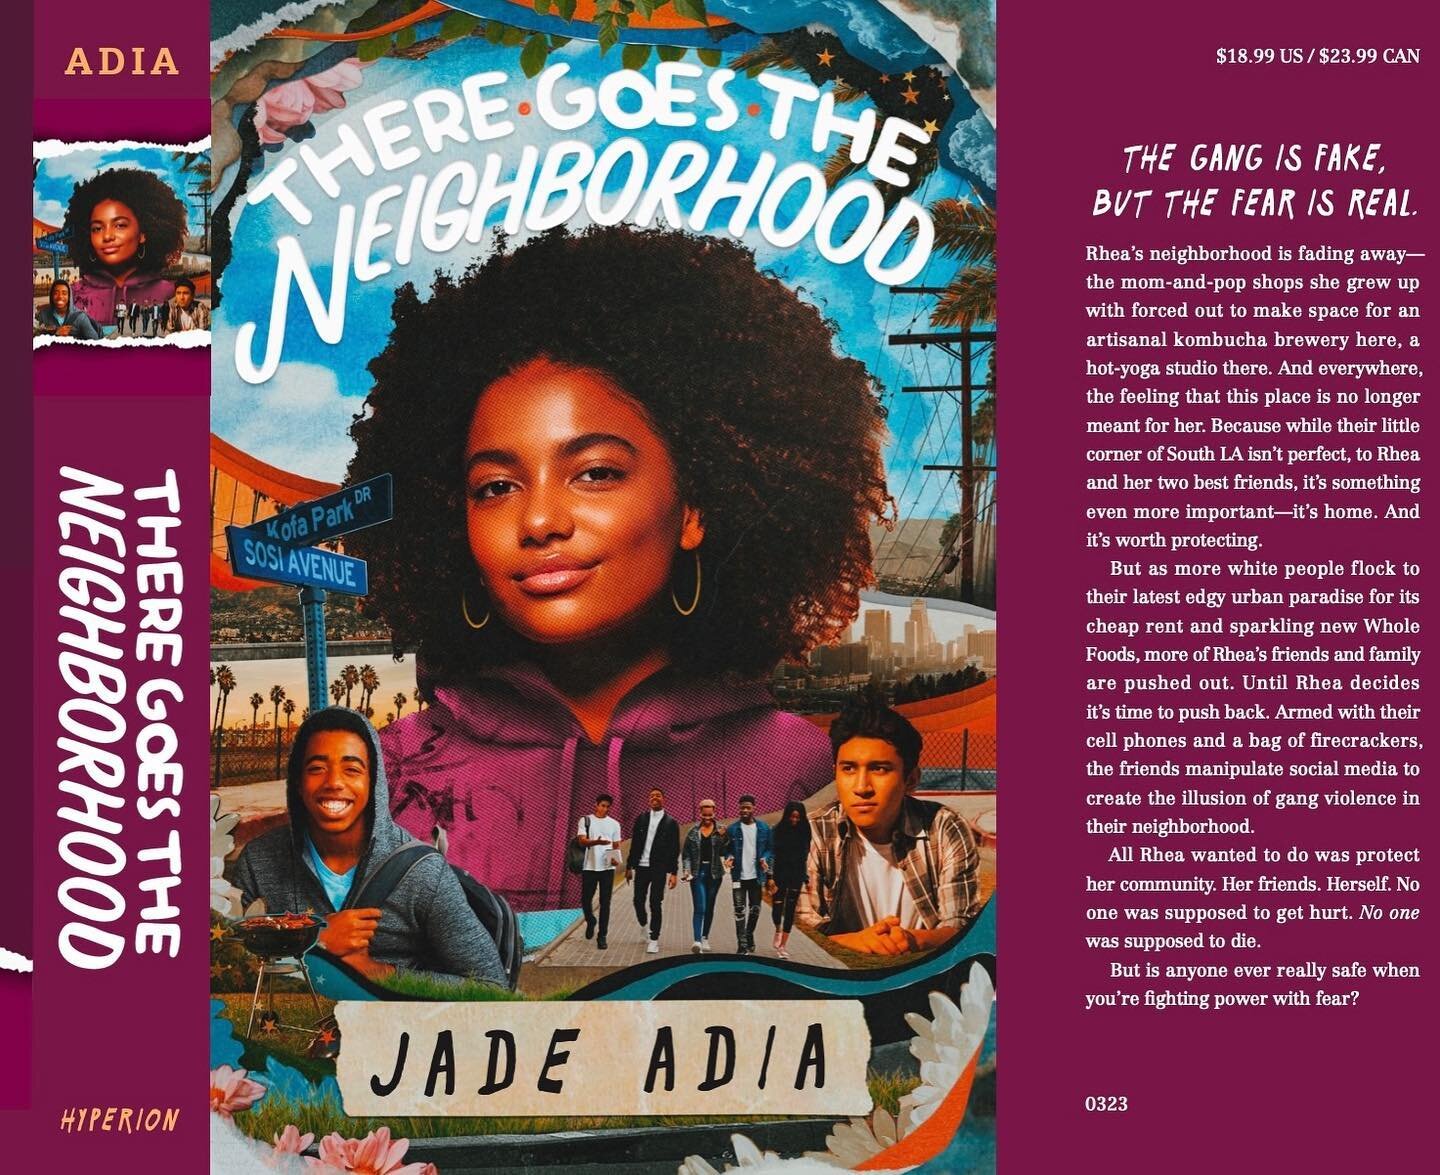 BOOK JACKET FINALIZED. FINAL EDITION GOING TO PRINTERS TODAY. AUTHOR HOPES AND DREAMS REALIZED 😟😖🥺

check out the Credits page we added at the end. publishing is a team sport and wowowow am i grateful to work with so many dope people to bring this